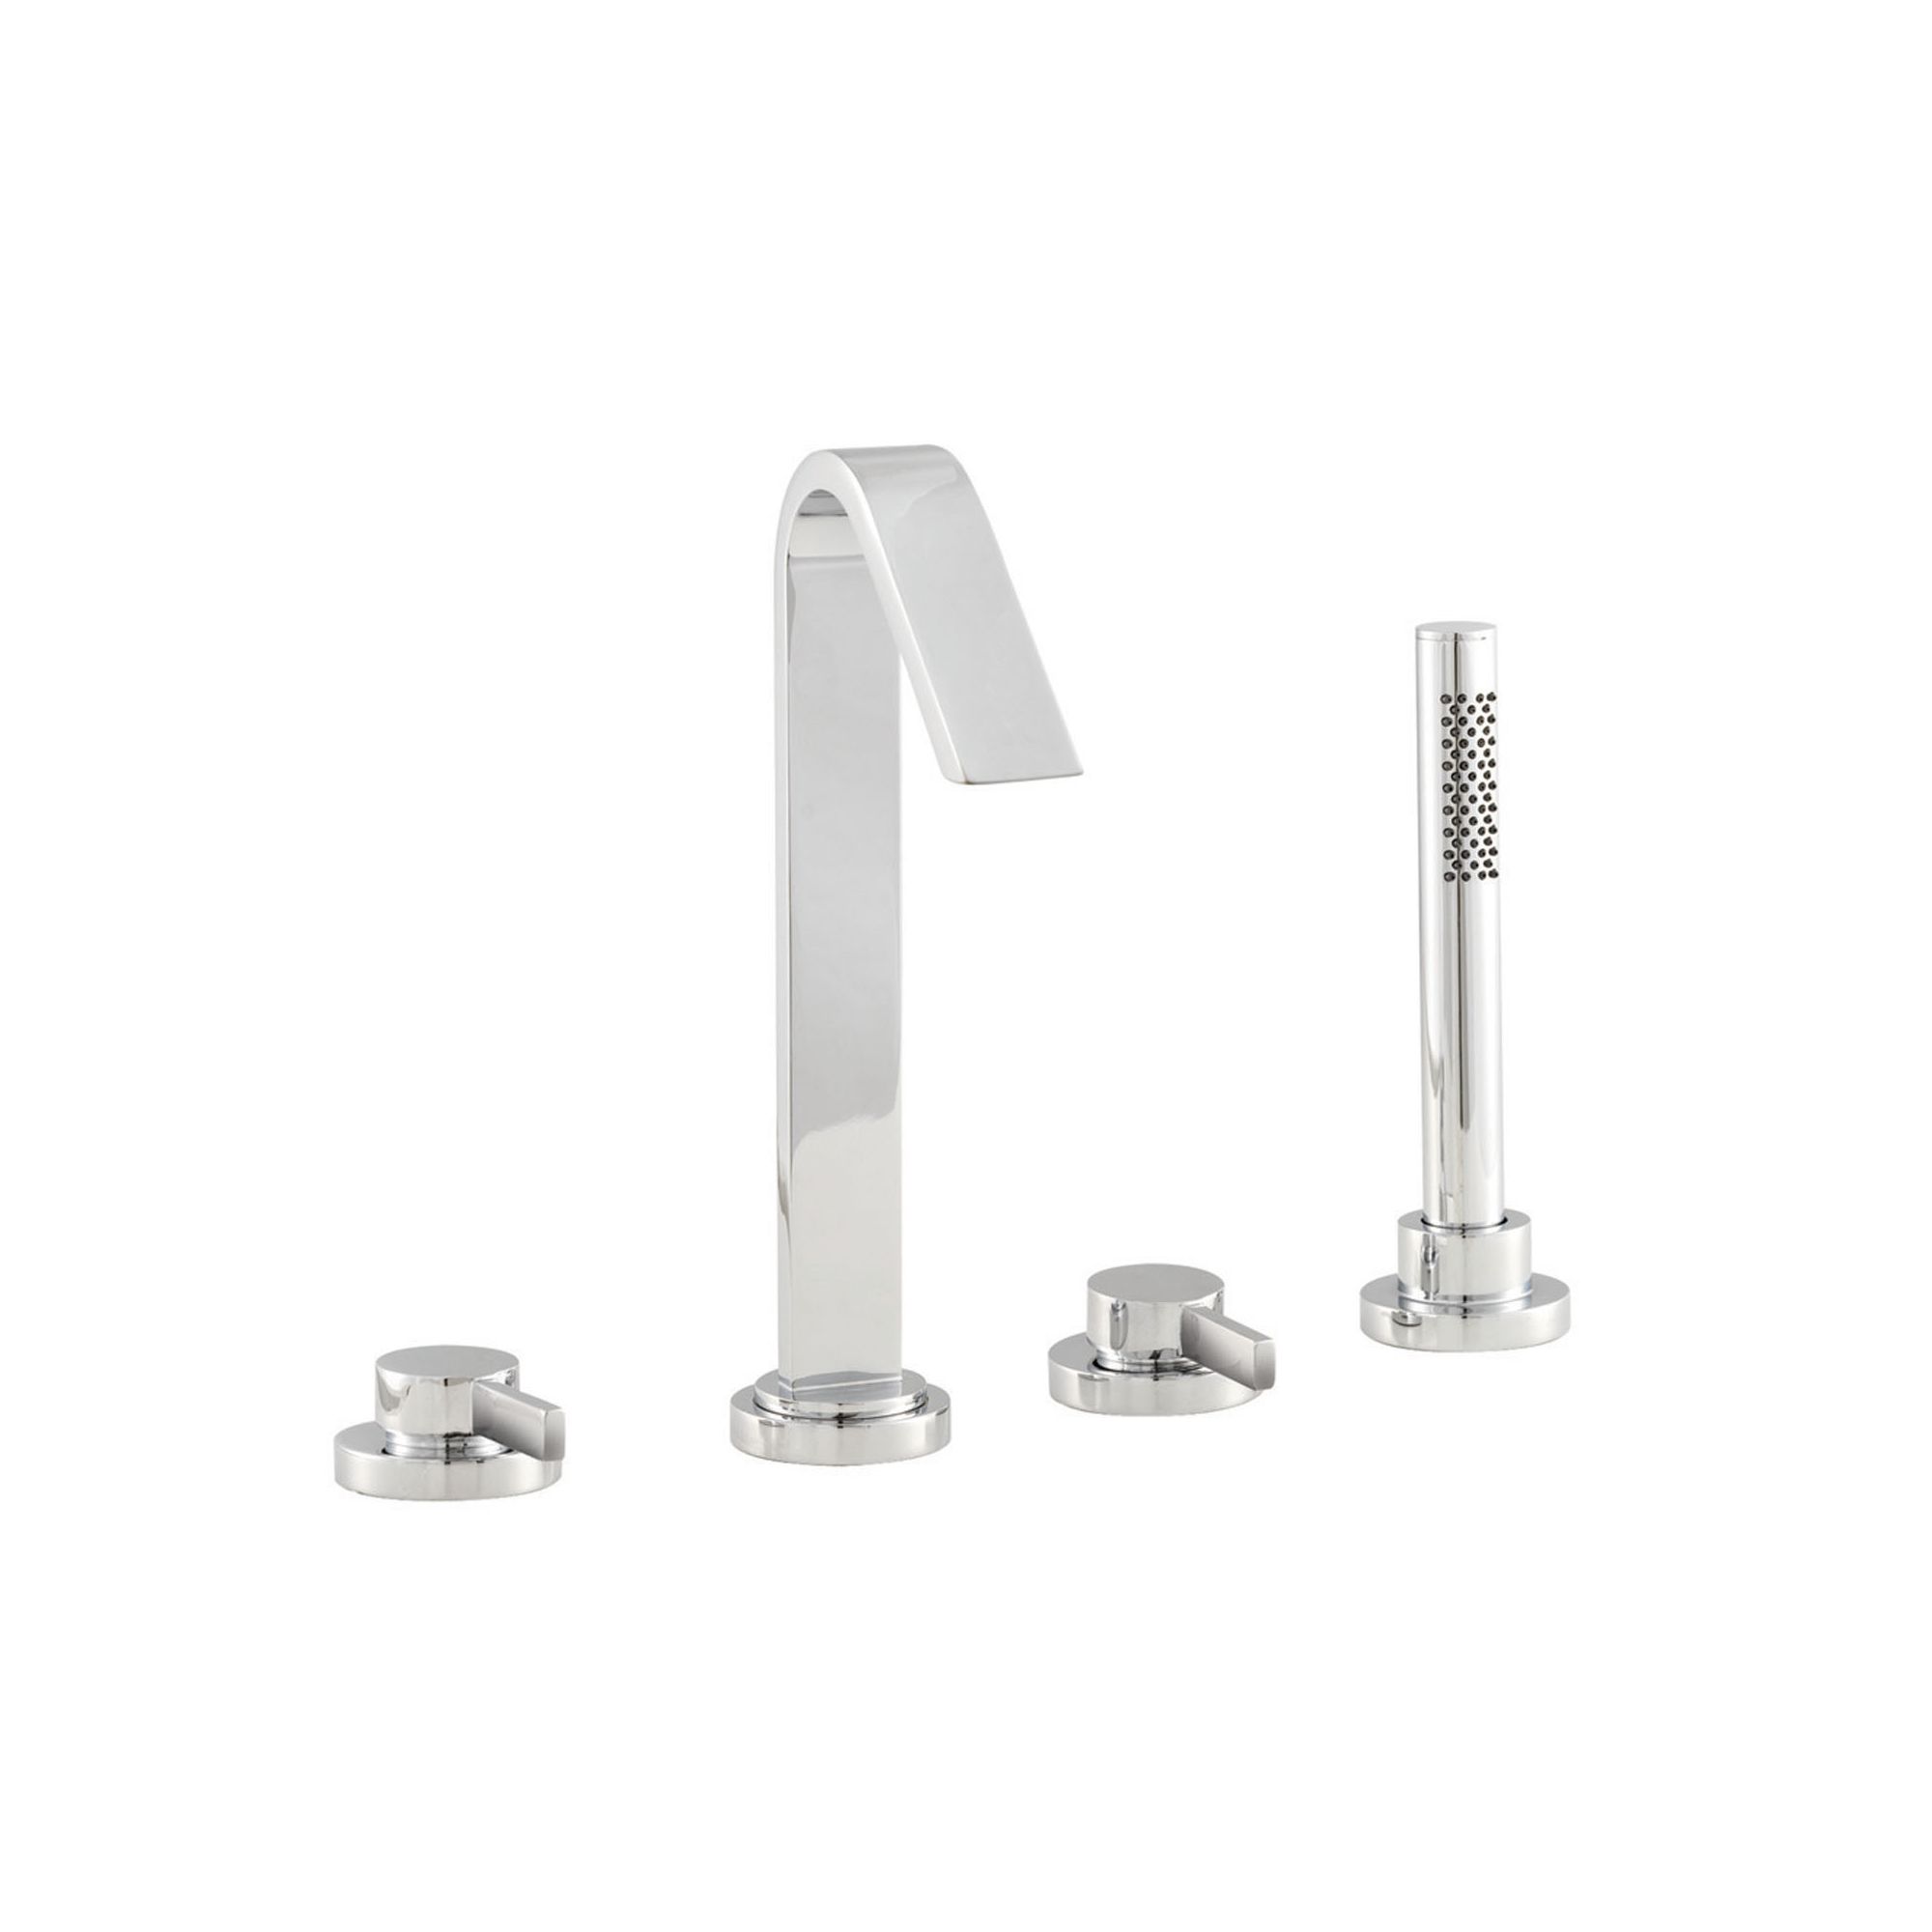 Hudson Reed Clio 4 Tap Hole Bath Mixer with Swivel Spout and Shower Kit at Tesco Direct